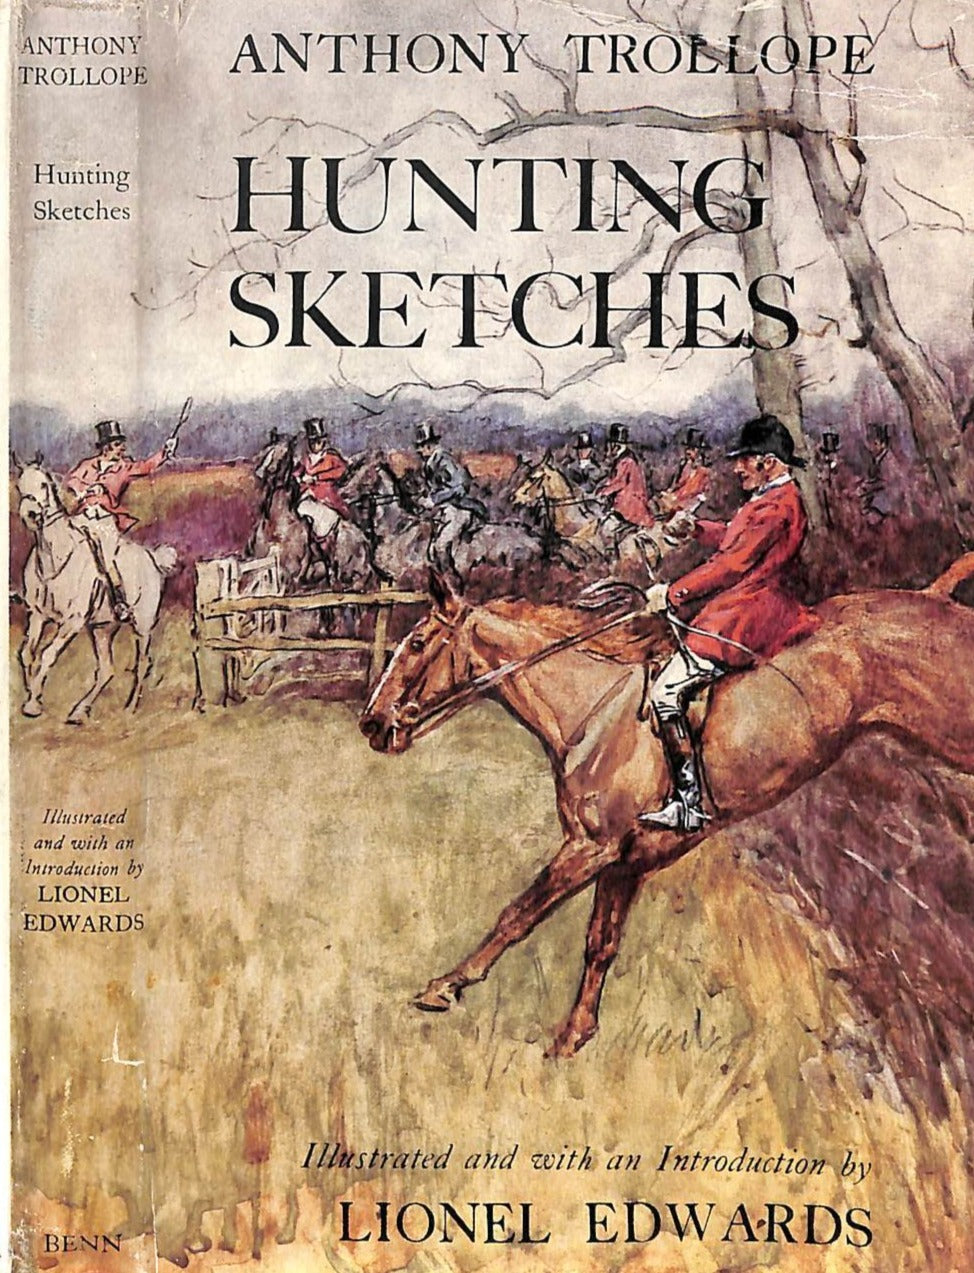 "Hunting Sketches" 1952 TROLLOPE, Anthony & EDWARDS, Lionel